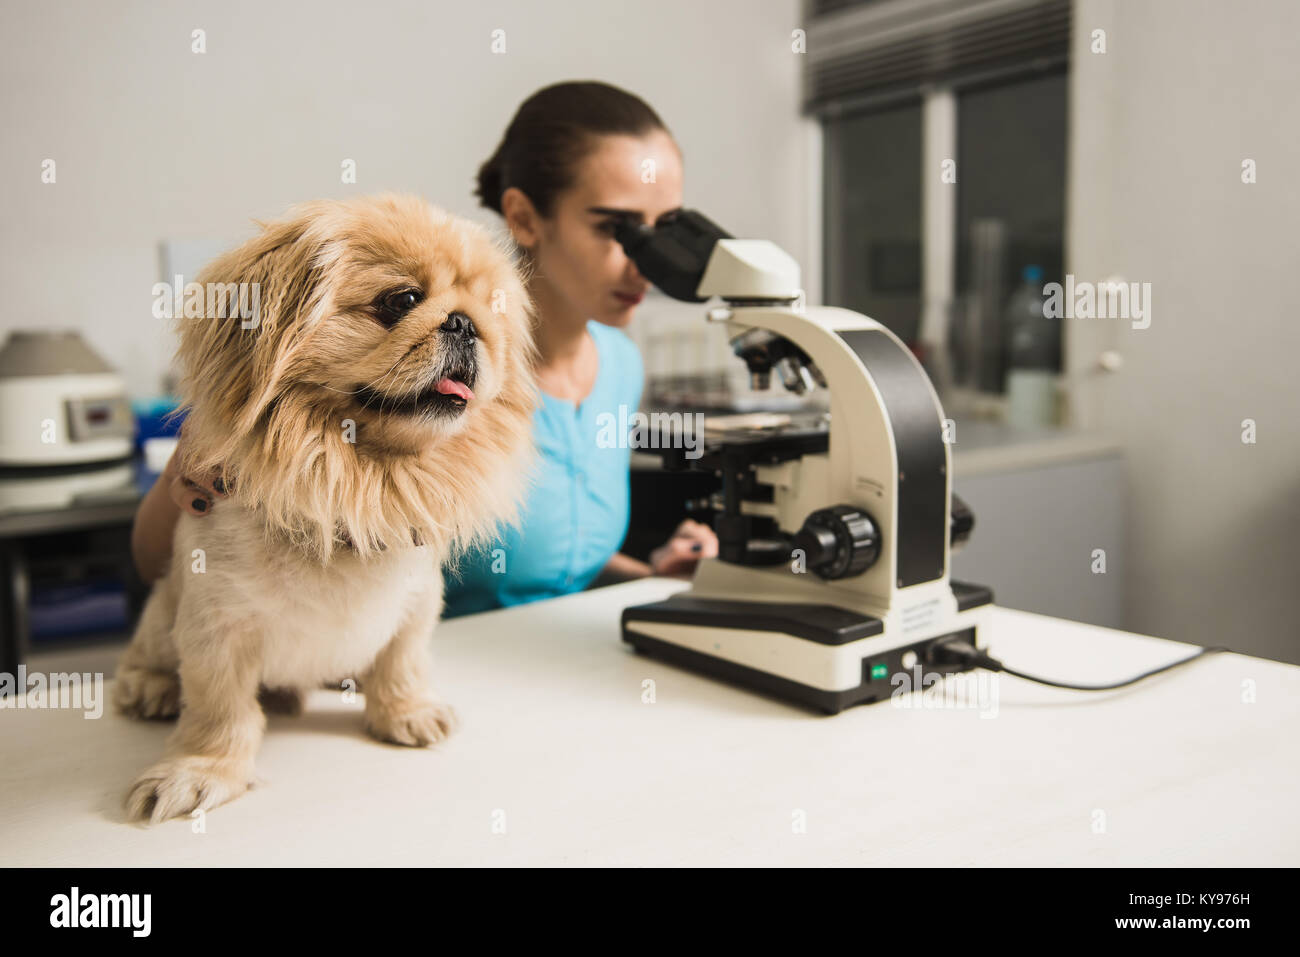 Female vet with dog and microscope. Female researcher with a microscope. Laboratory in the Veterinary Clinic. Focus on the dog. Stock Photo